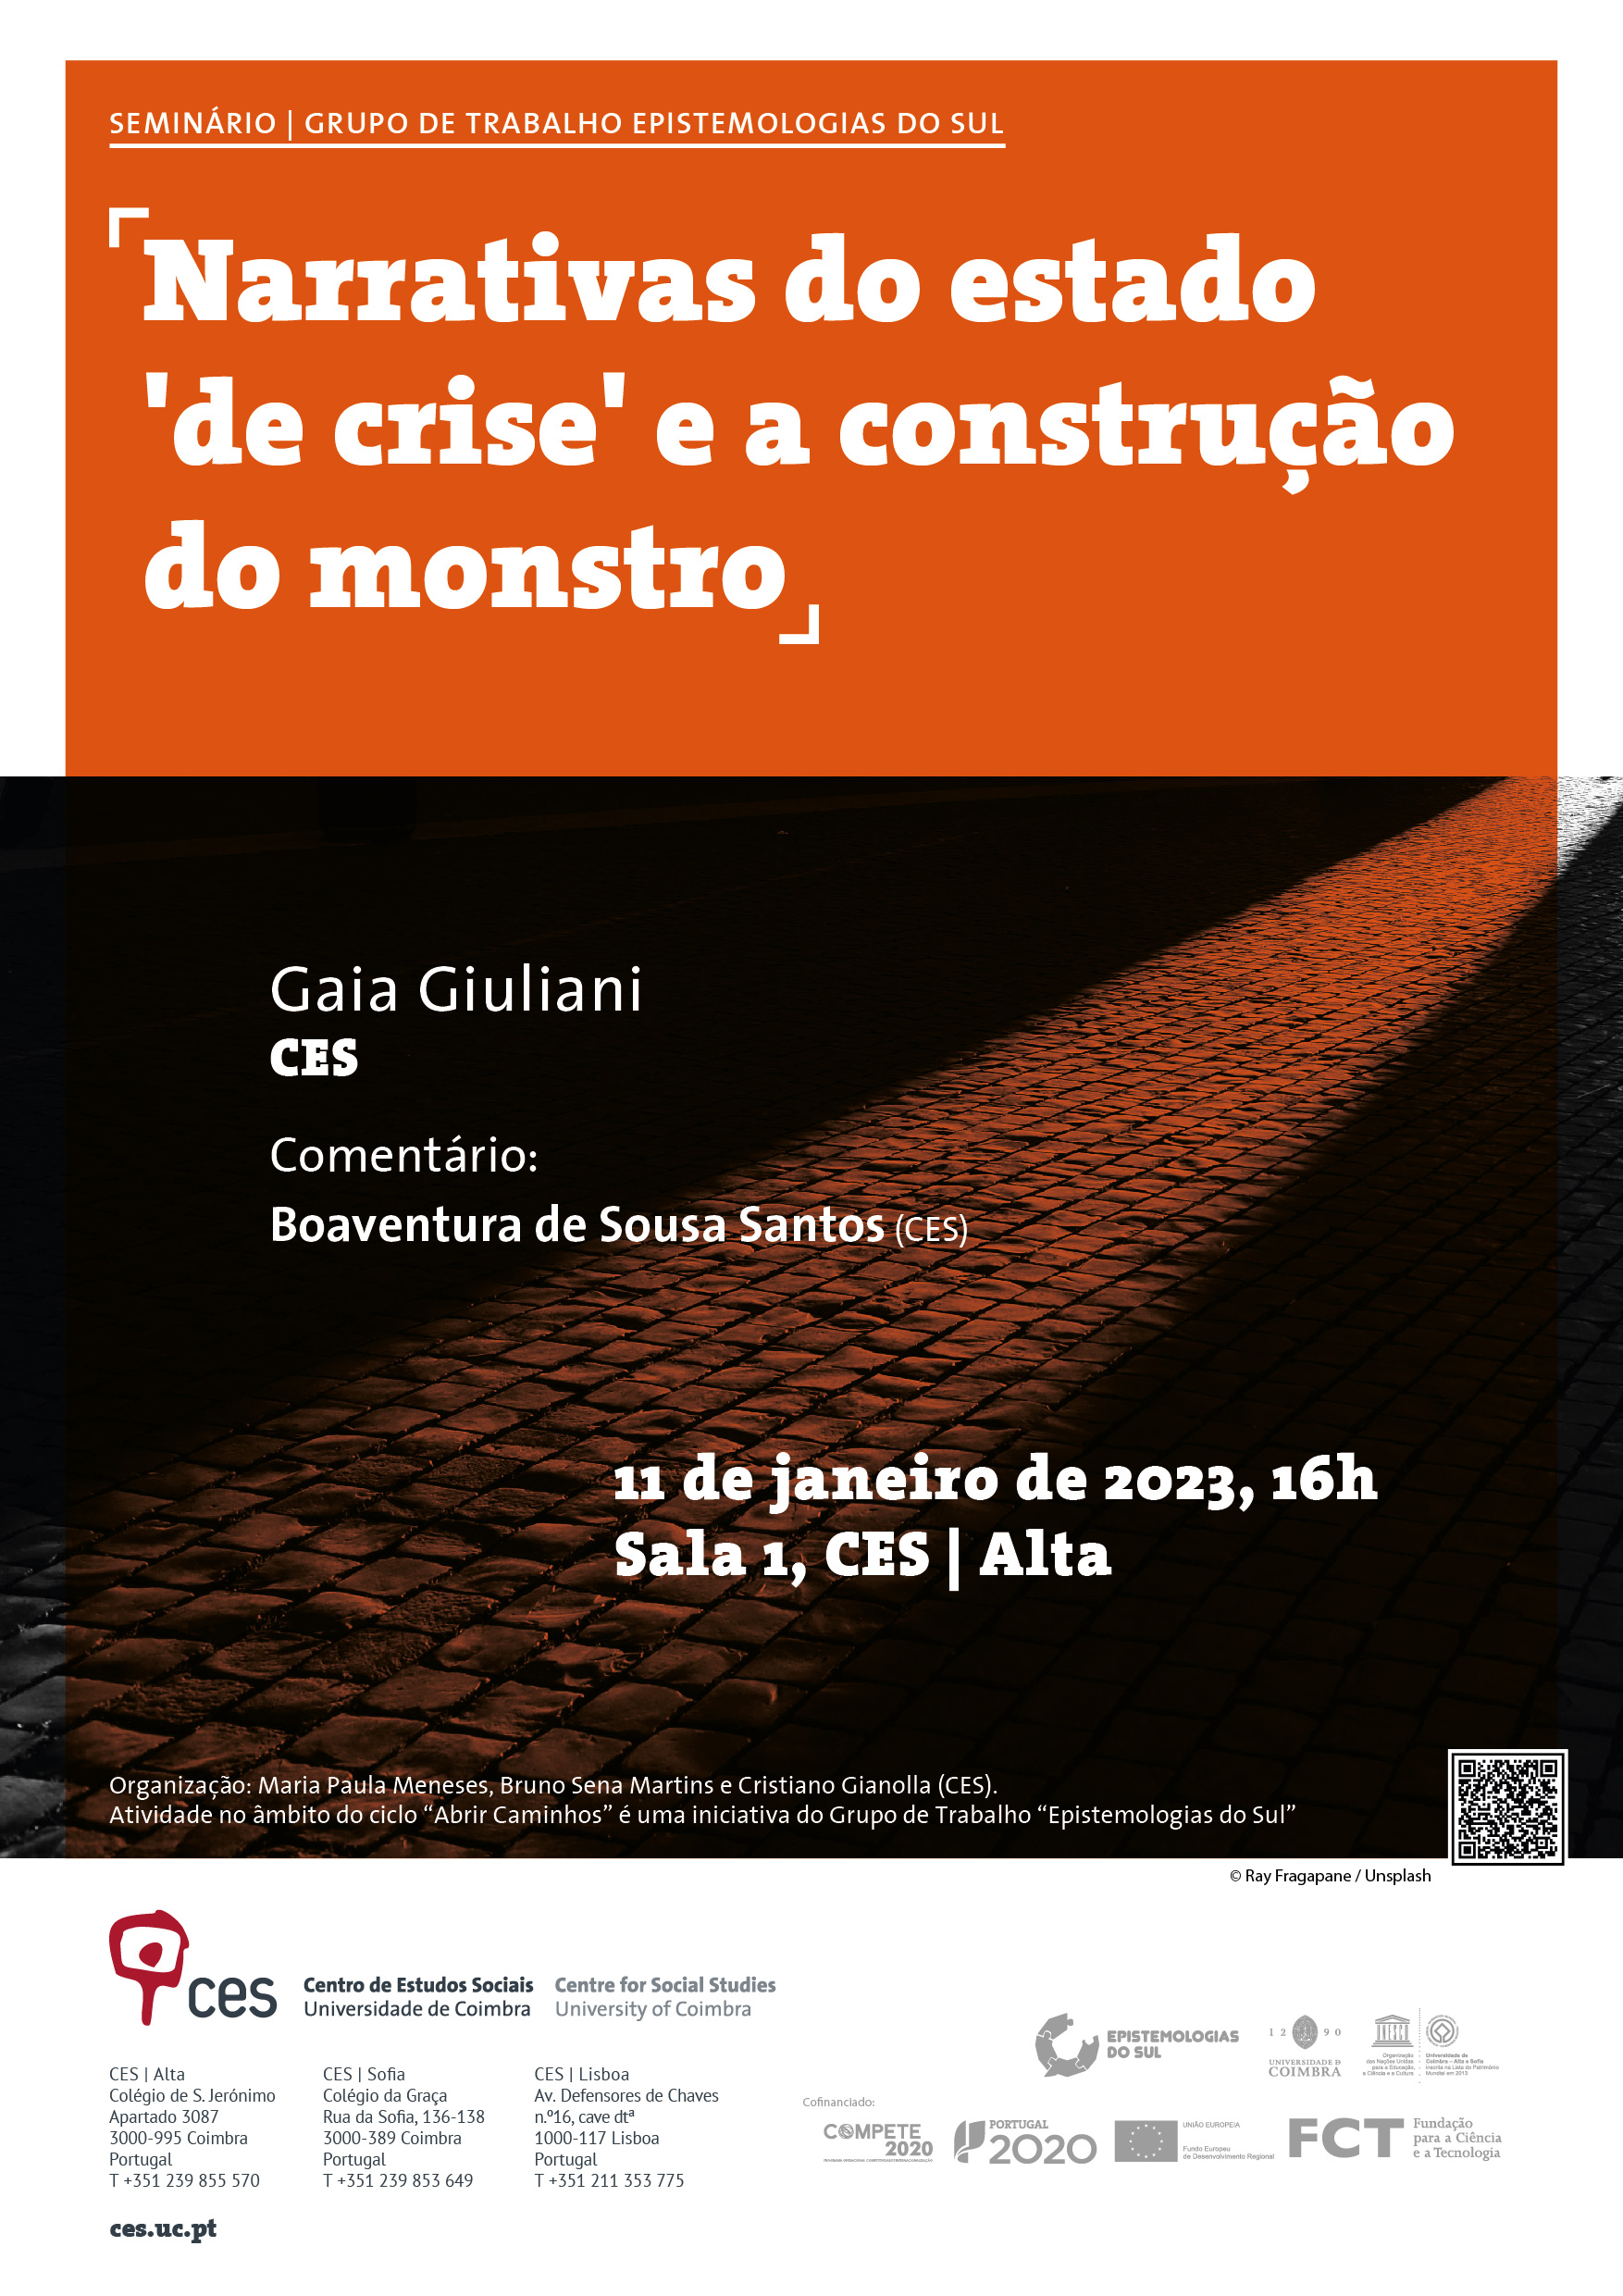 Narratives of the 'crisis' state and the construction of the monster<span id="edit_41128"><script>$(function() { $('#edit_41128').load( "/myces/user/editobj.php?tipo=evento&id=41128" ); });</script></span>